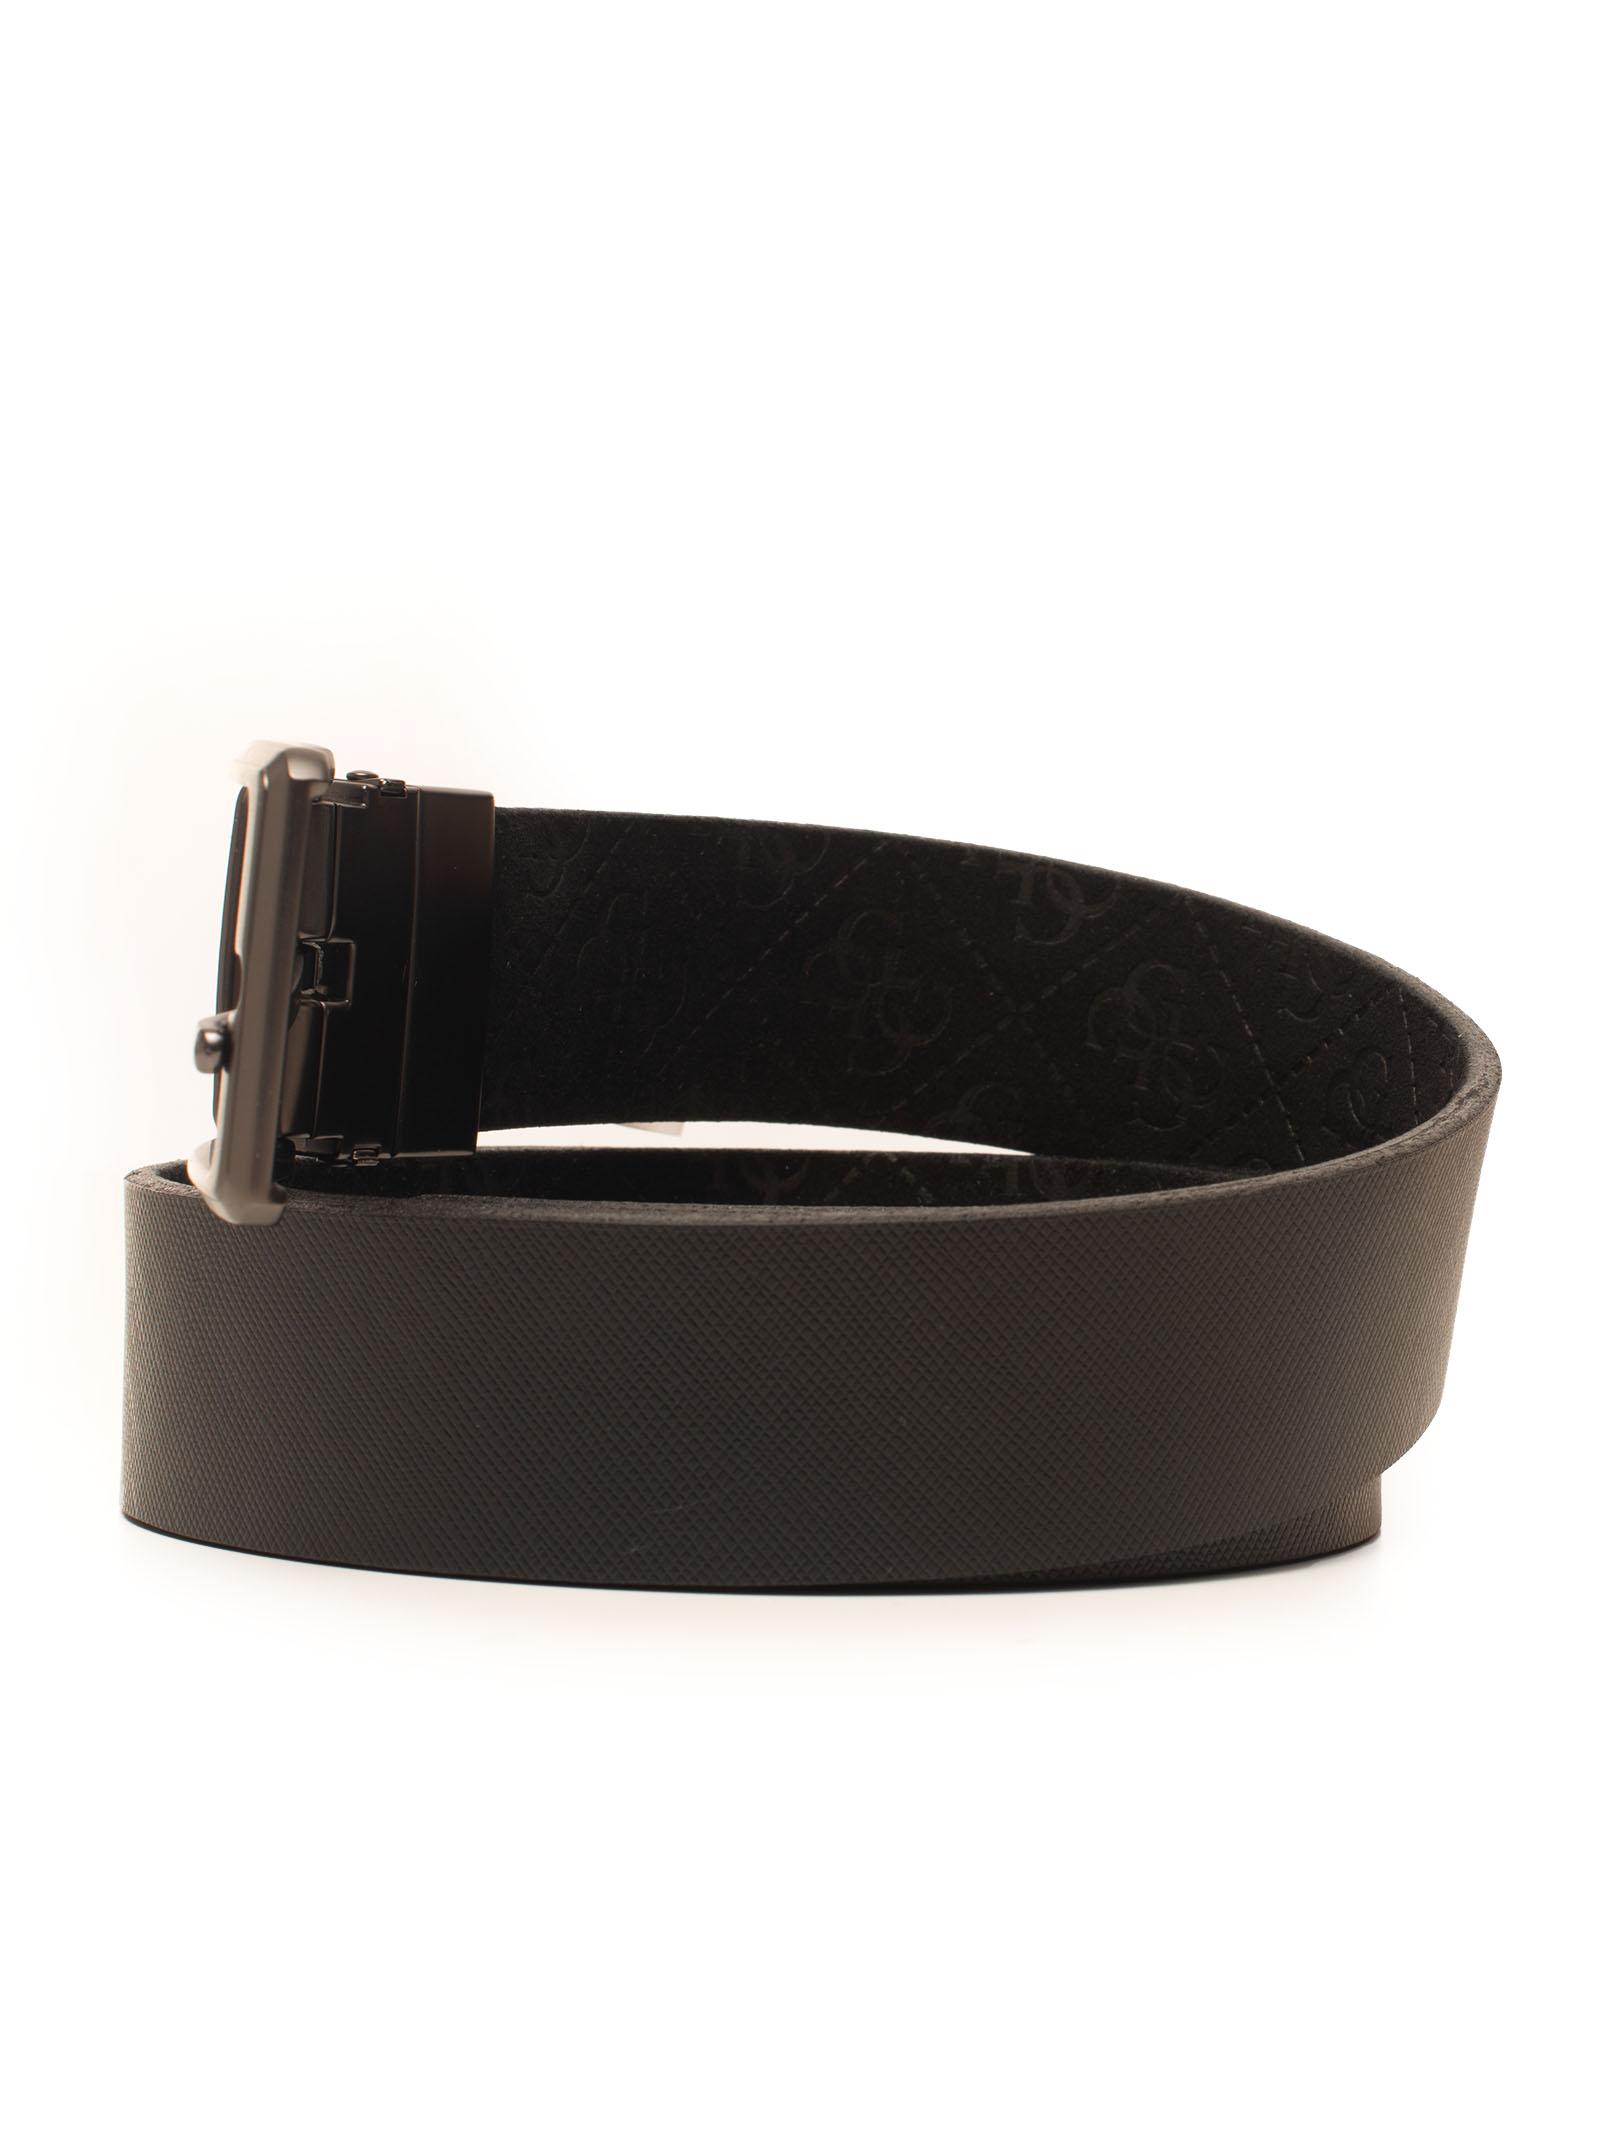 Guess Leather Belt Black Leather for Men - Lyst